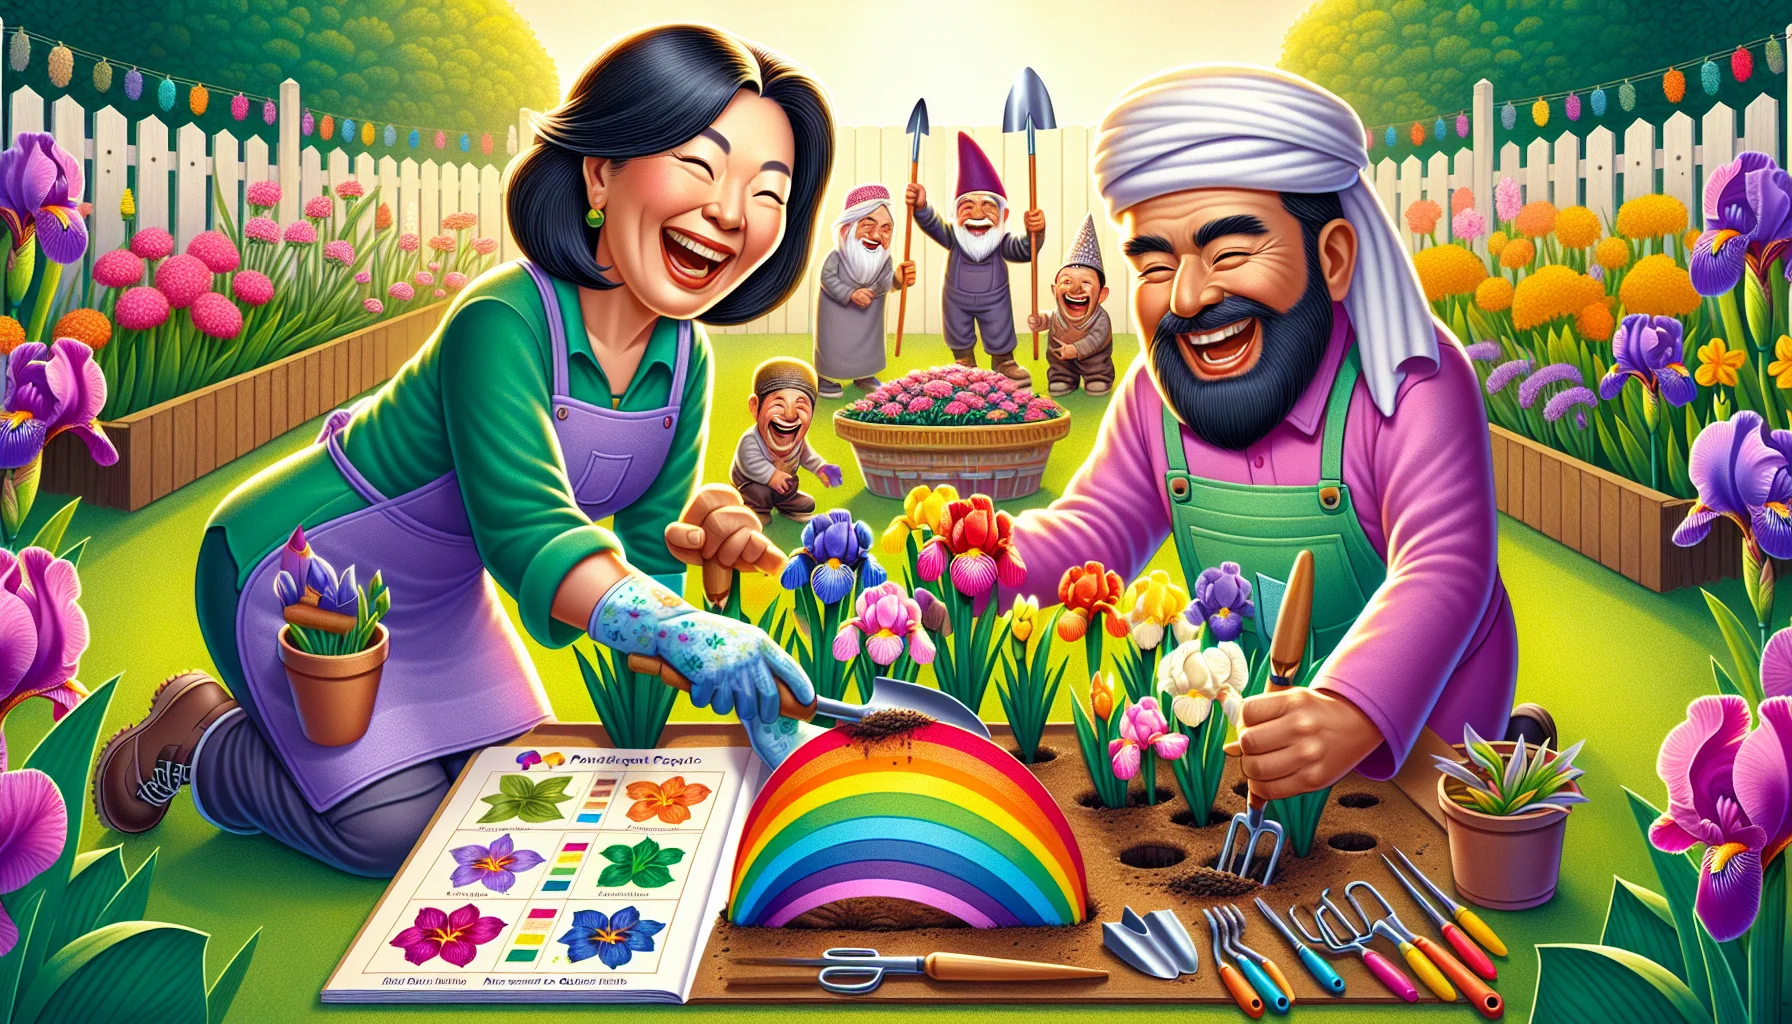 Create a lively and amusing garden scene where a rainbow of delightfully colored iris flowers is being planted. An East Asian woman and a Middle Eastern man, both donned in vibrant gardening attire, are seen enthusiastically digging holes around the garden. Their faces are lit up with joy and determination, making the task look enjoyable and light-hearted. The garden, full of blooming flowers of various kinds, is bathed in soft sunlight, adding a warm and welcoming ambiance to the scene. An array of gardening tools and a vibrant plant chart showing where to plant the iris flowers gracefully lie on the table beside them. Comedy ensues as a group of goofy garden gnomes seem to be helping with the planting, adding a heartwarming touch of humour and whimsy to the scene.